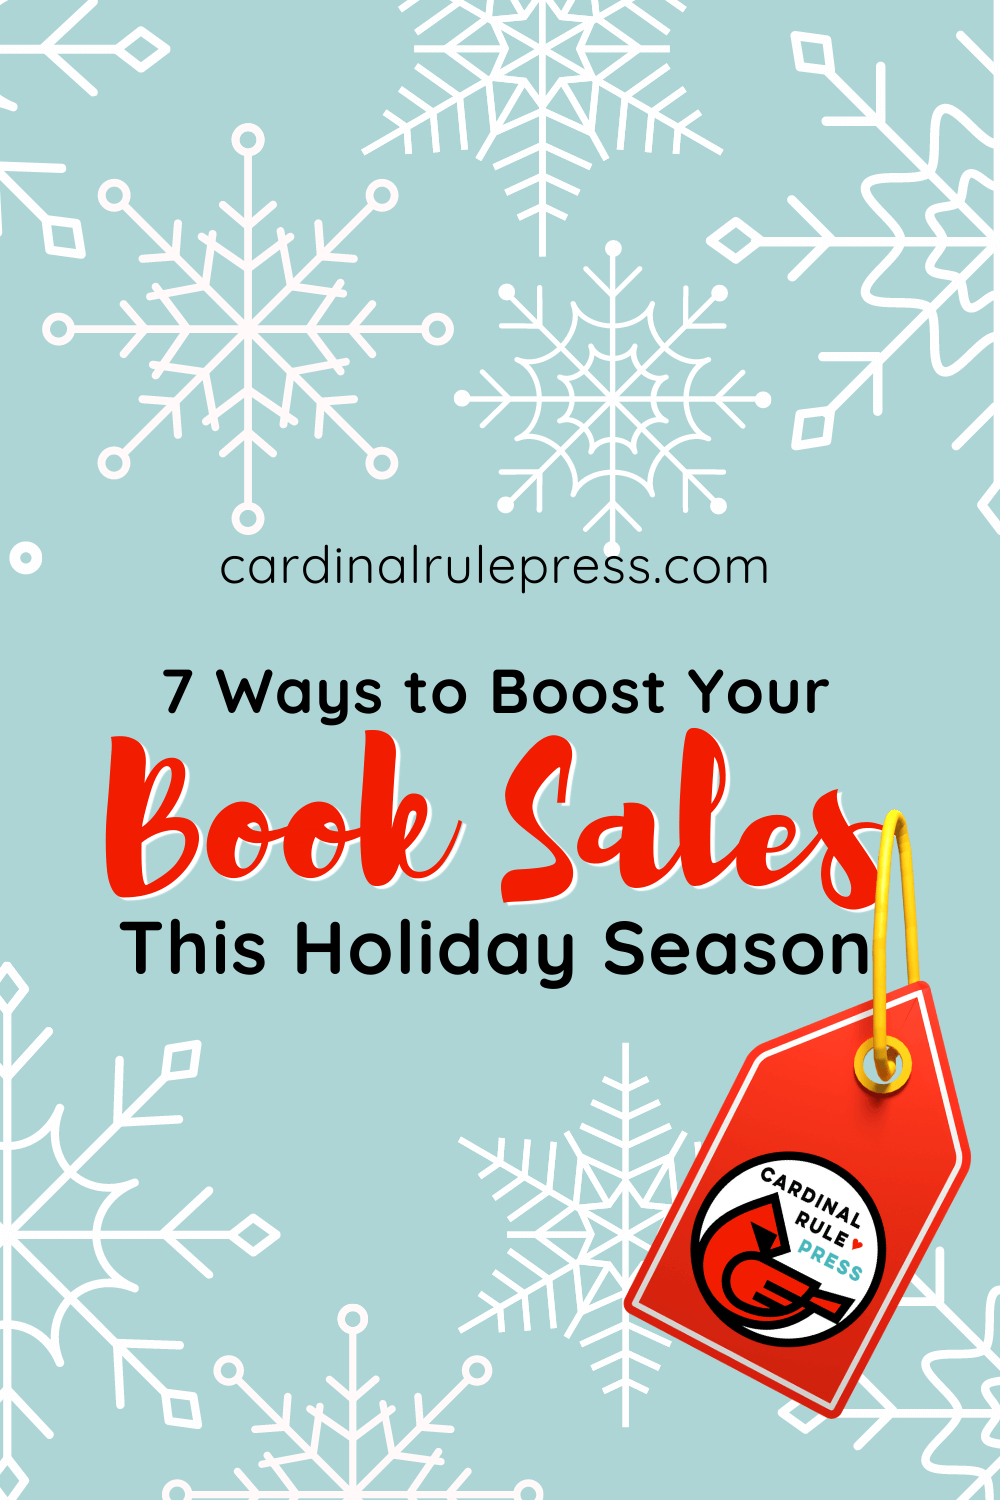 7 Ways to Boost Your Book Sales this Holiday Season. So, as an author or publisher, how can you use this booming holiday book market to your advantage? Seasonal marketing tips designed to help optimize your book sales in a climate that is more than accommodating! #HolidaySeason #BookSales #BoostYourBookSales